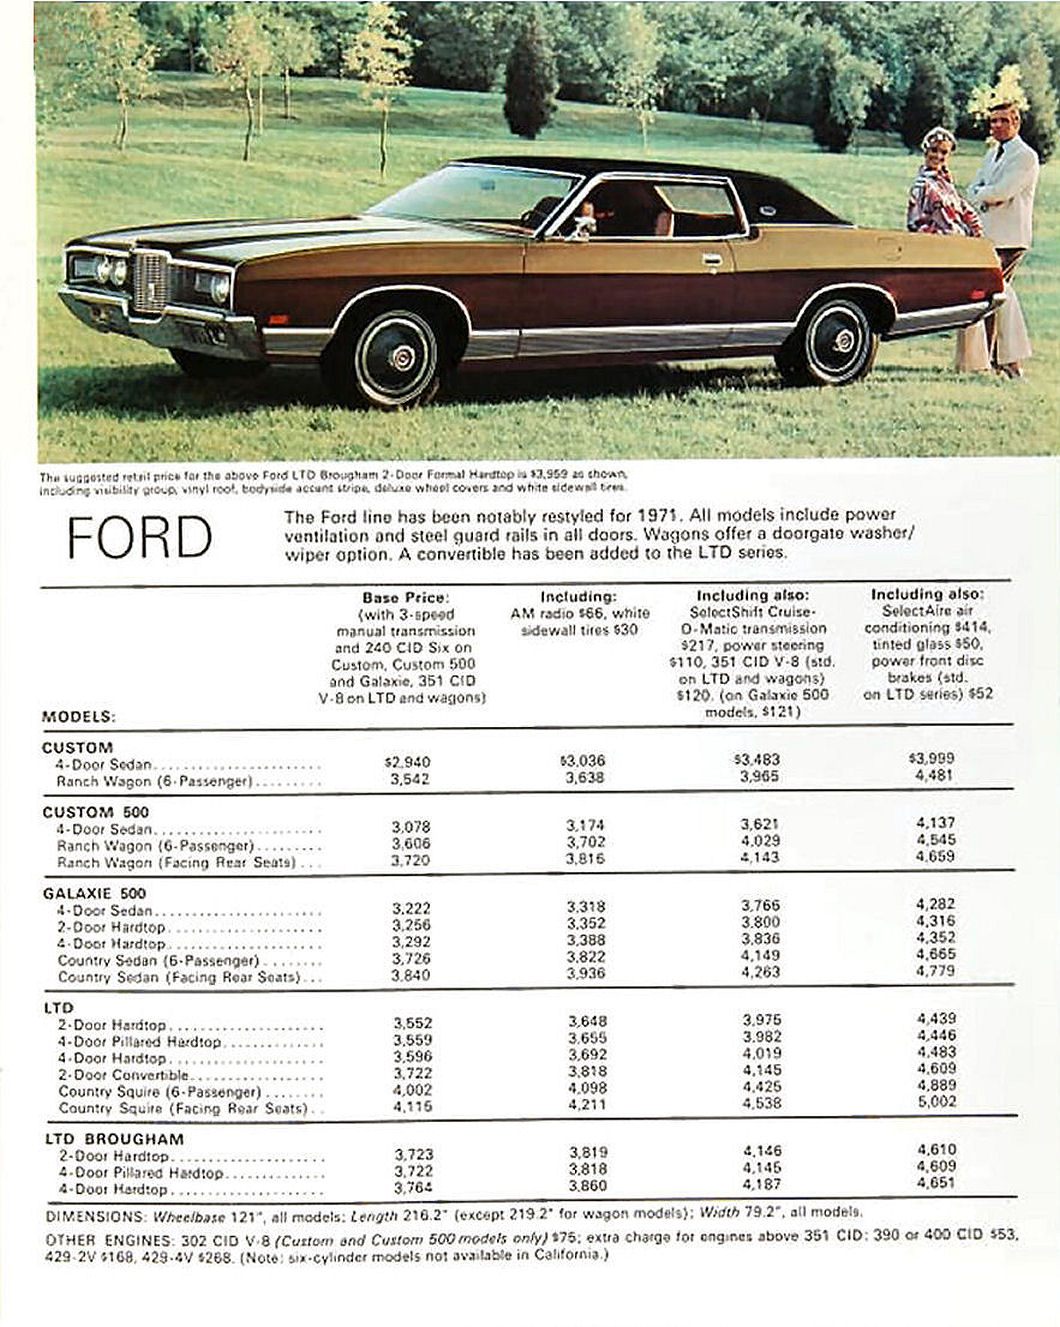 1971_Ford_Cars_Mailer-07